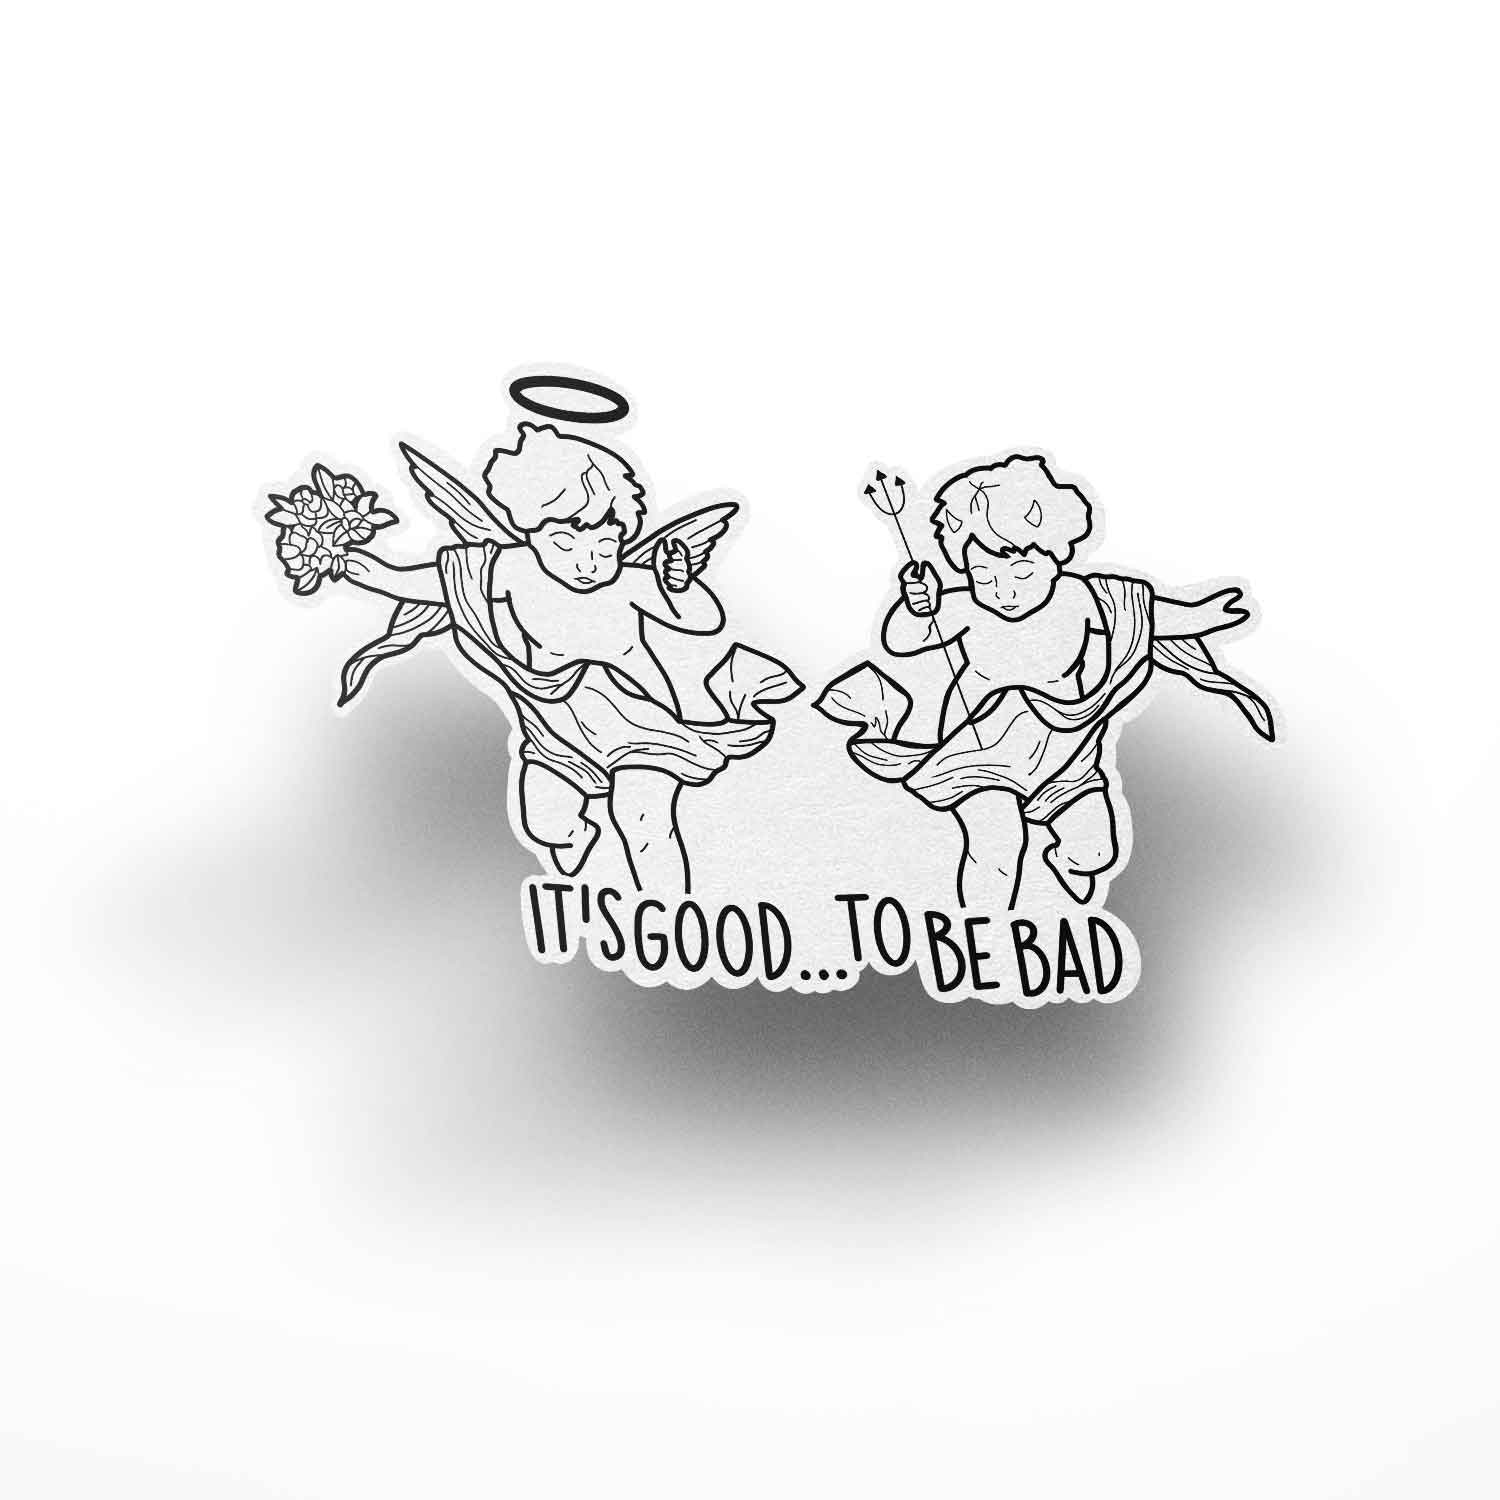 Good to be Bad Sticker